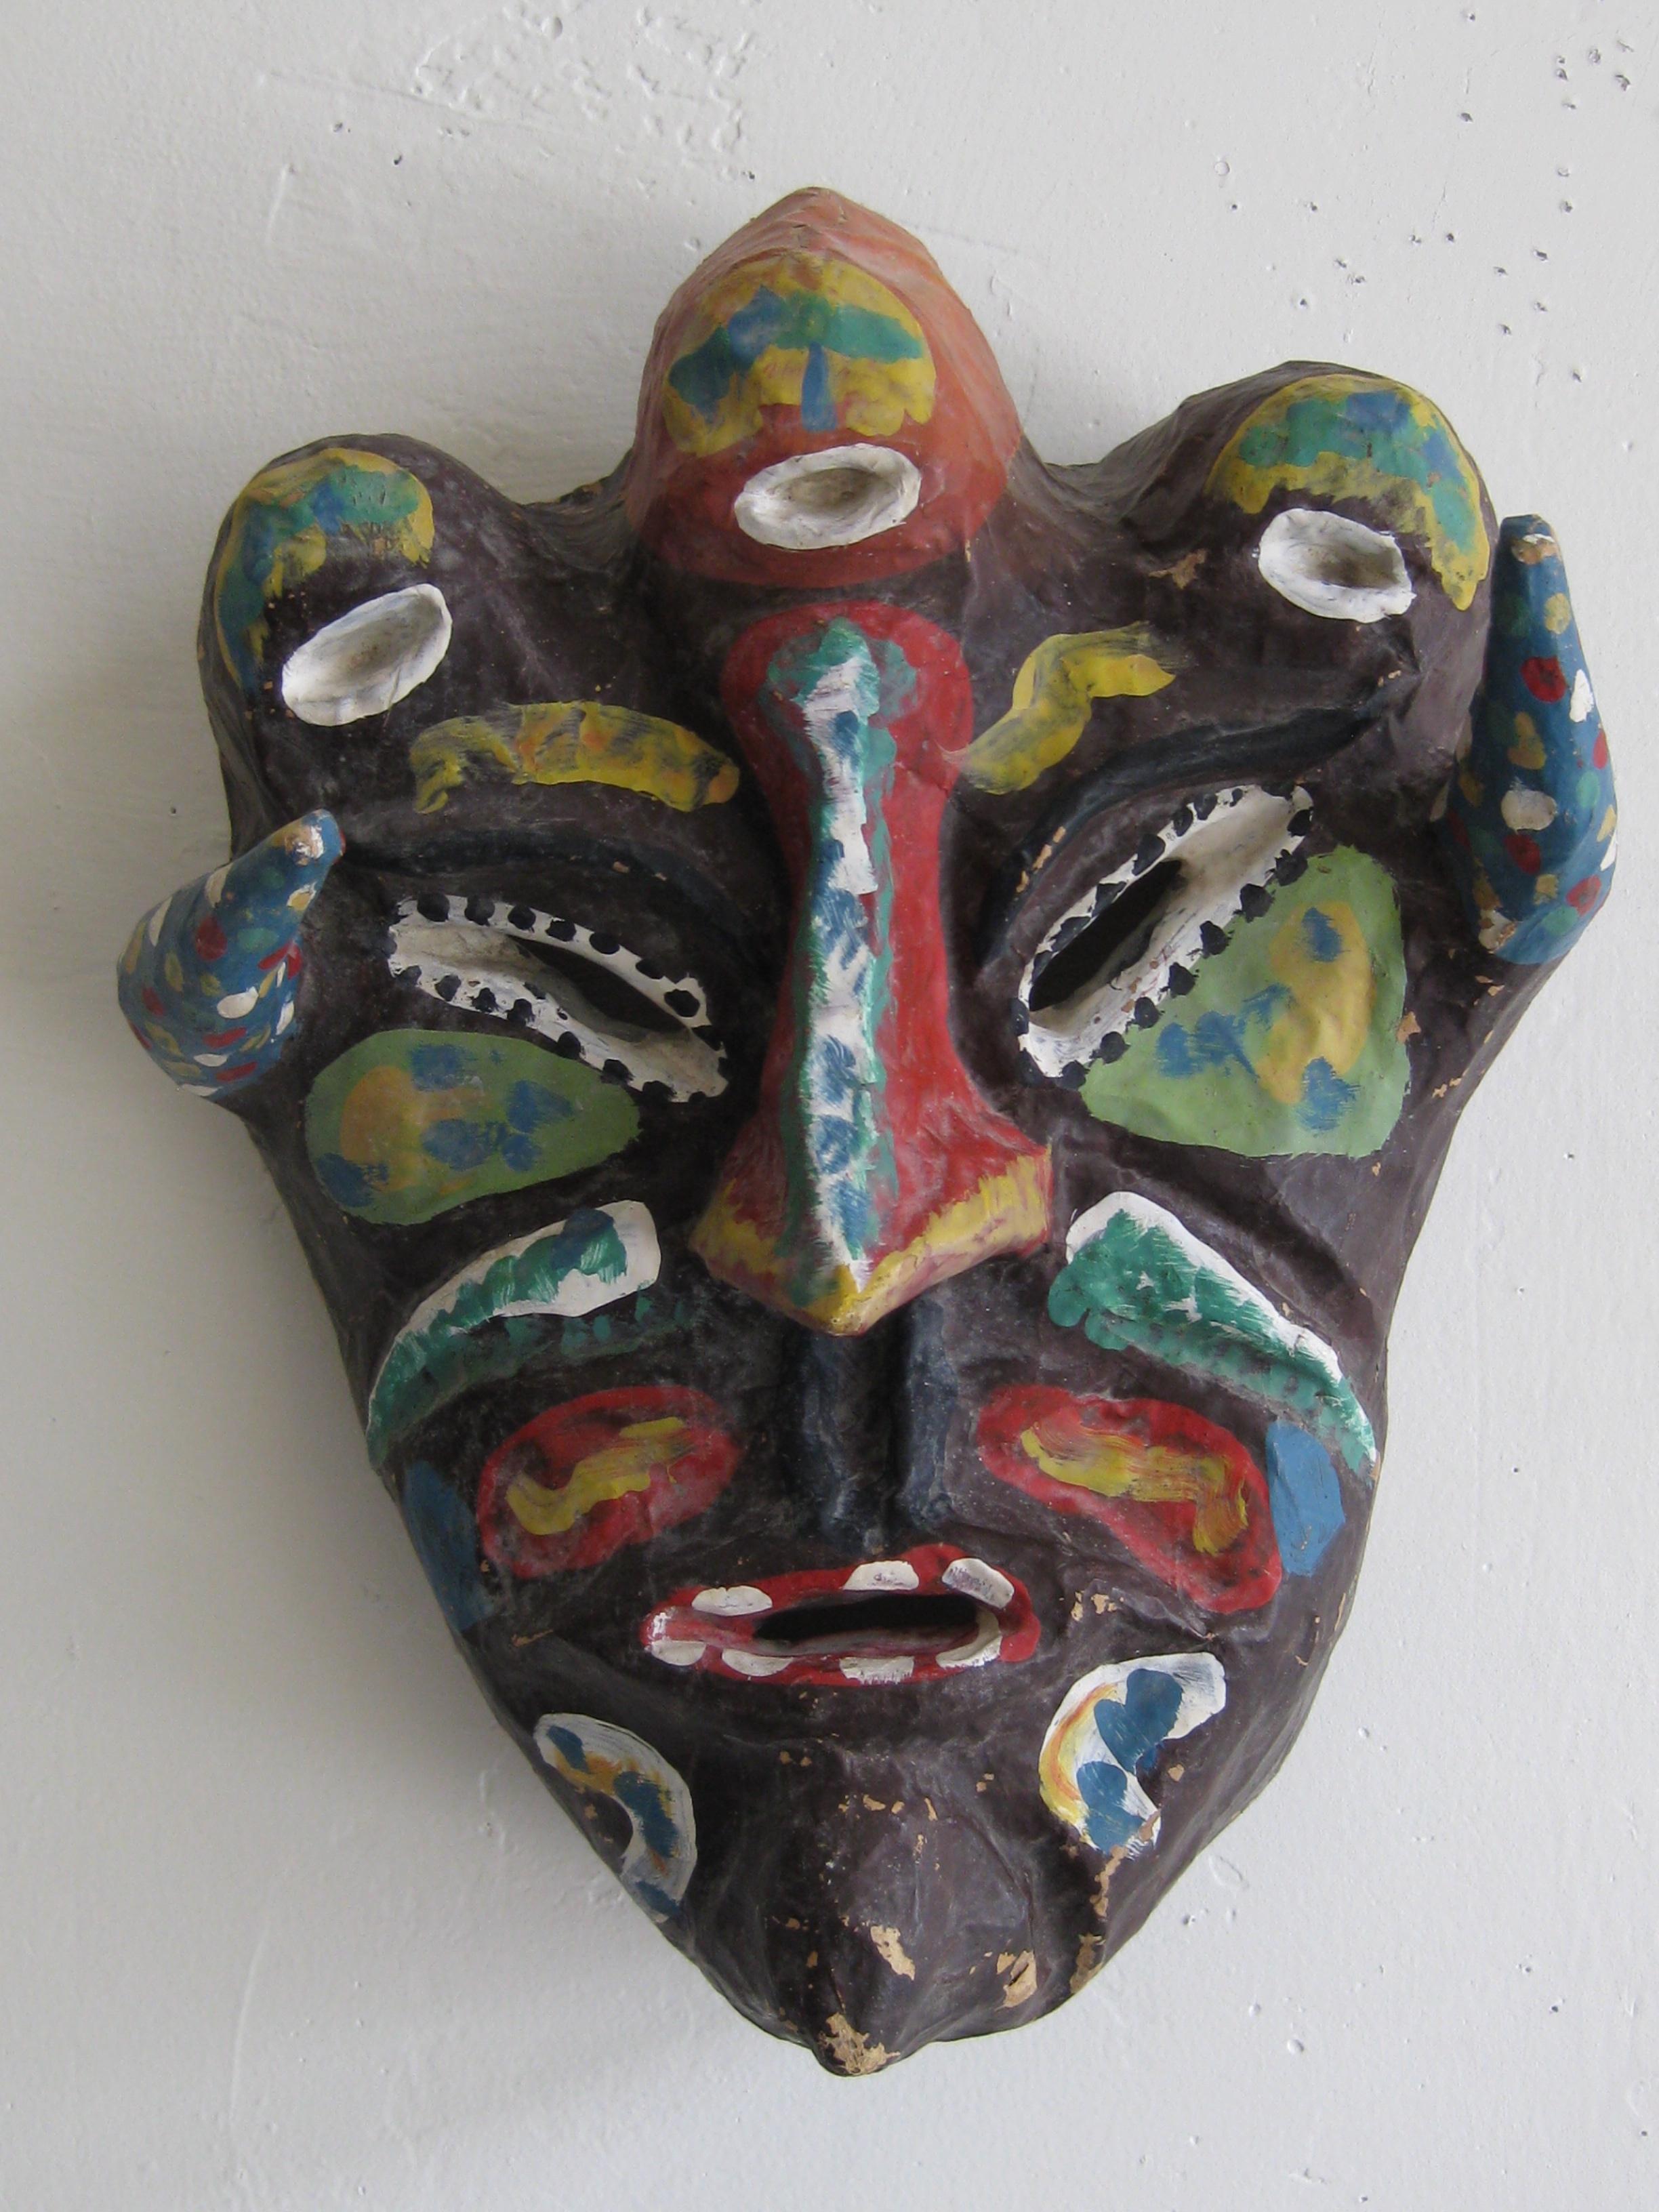 Very unique antique handmade Folk Art papier/papier mâché Mardi Gras/Halloween voodoo costume mask. The mask is handmade and painted by the artist. Signed 